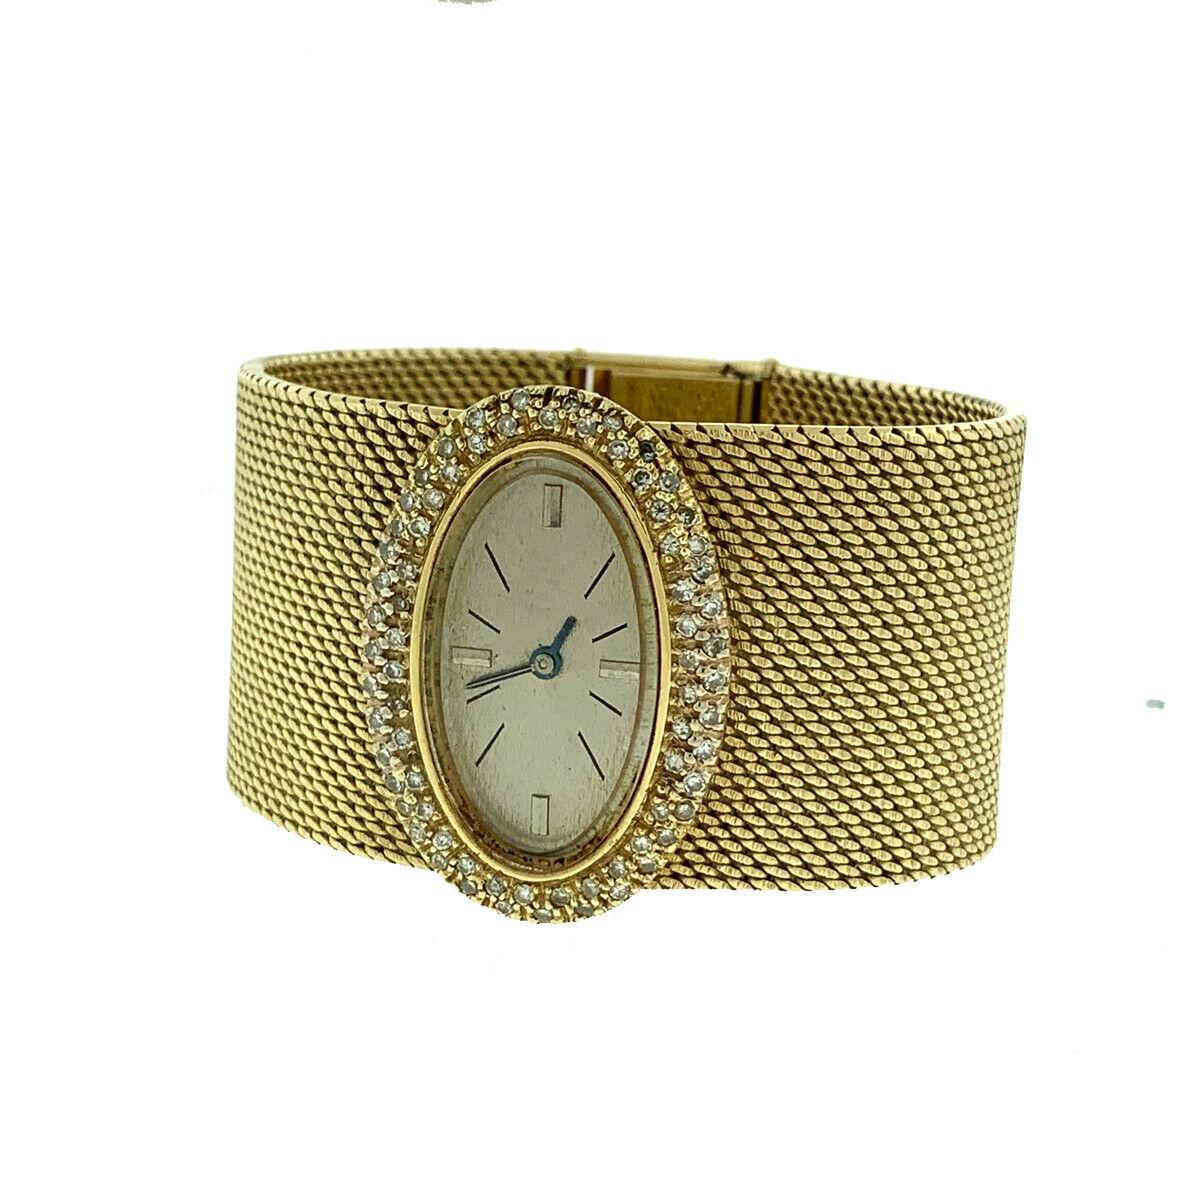 Oval Cut 14k Yellow Gold and Diamond Oval Shaped Vintage Ladies Watch